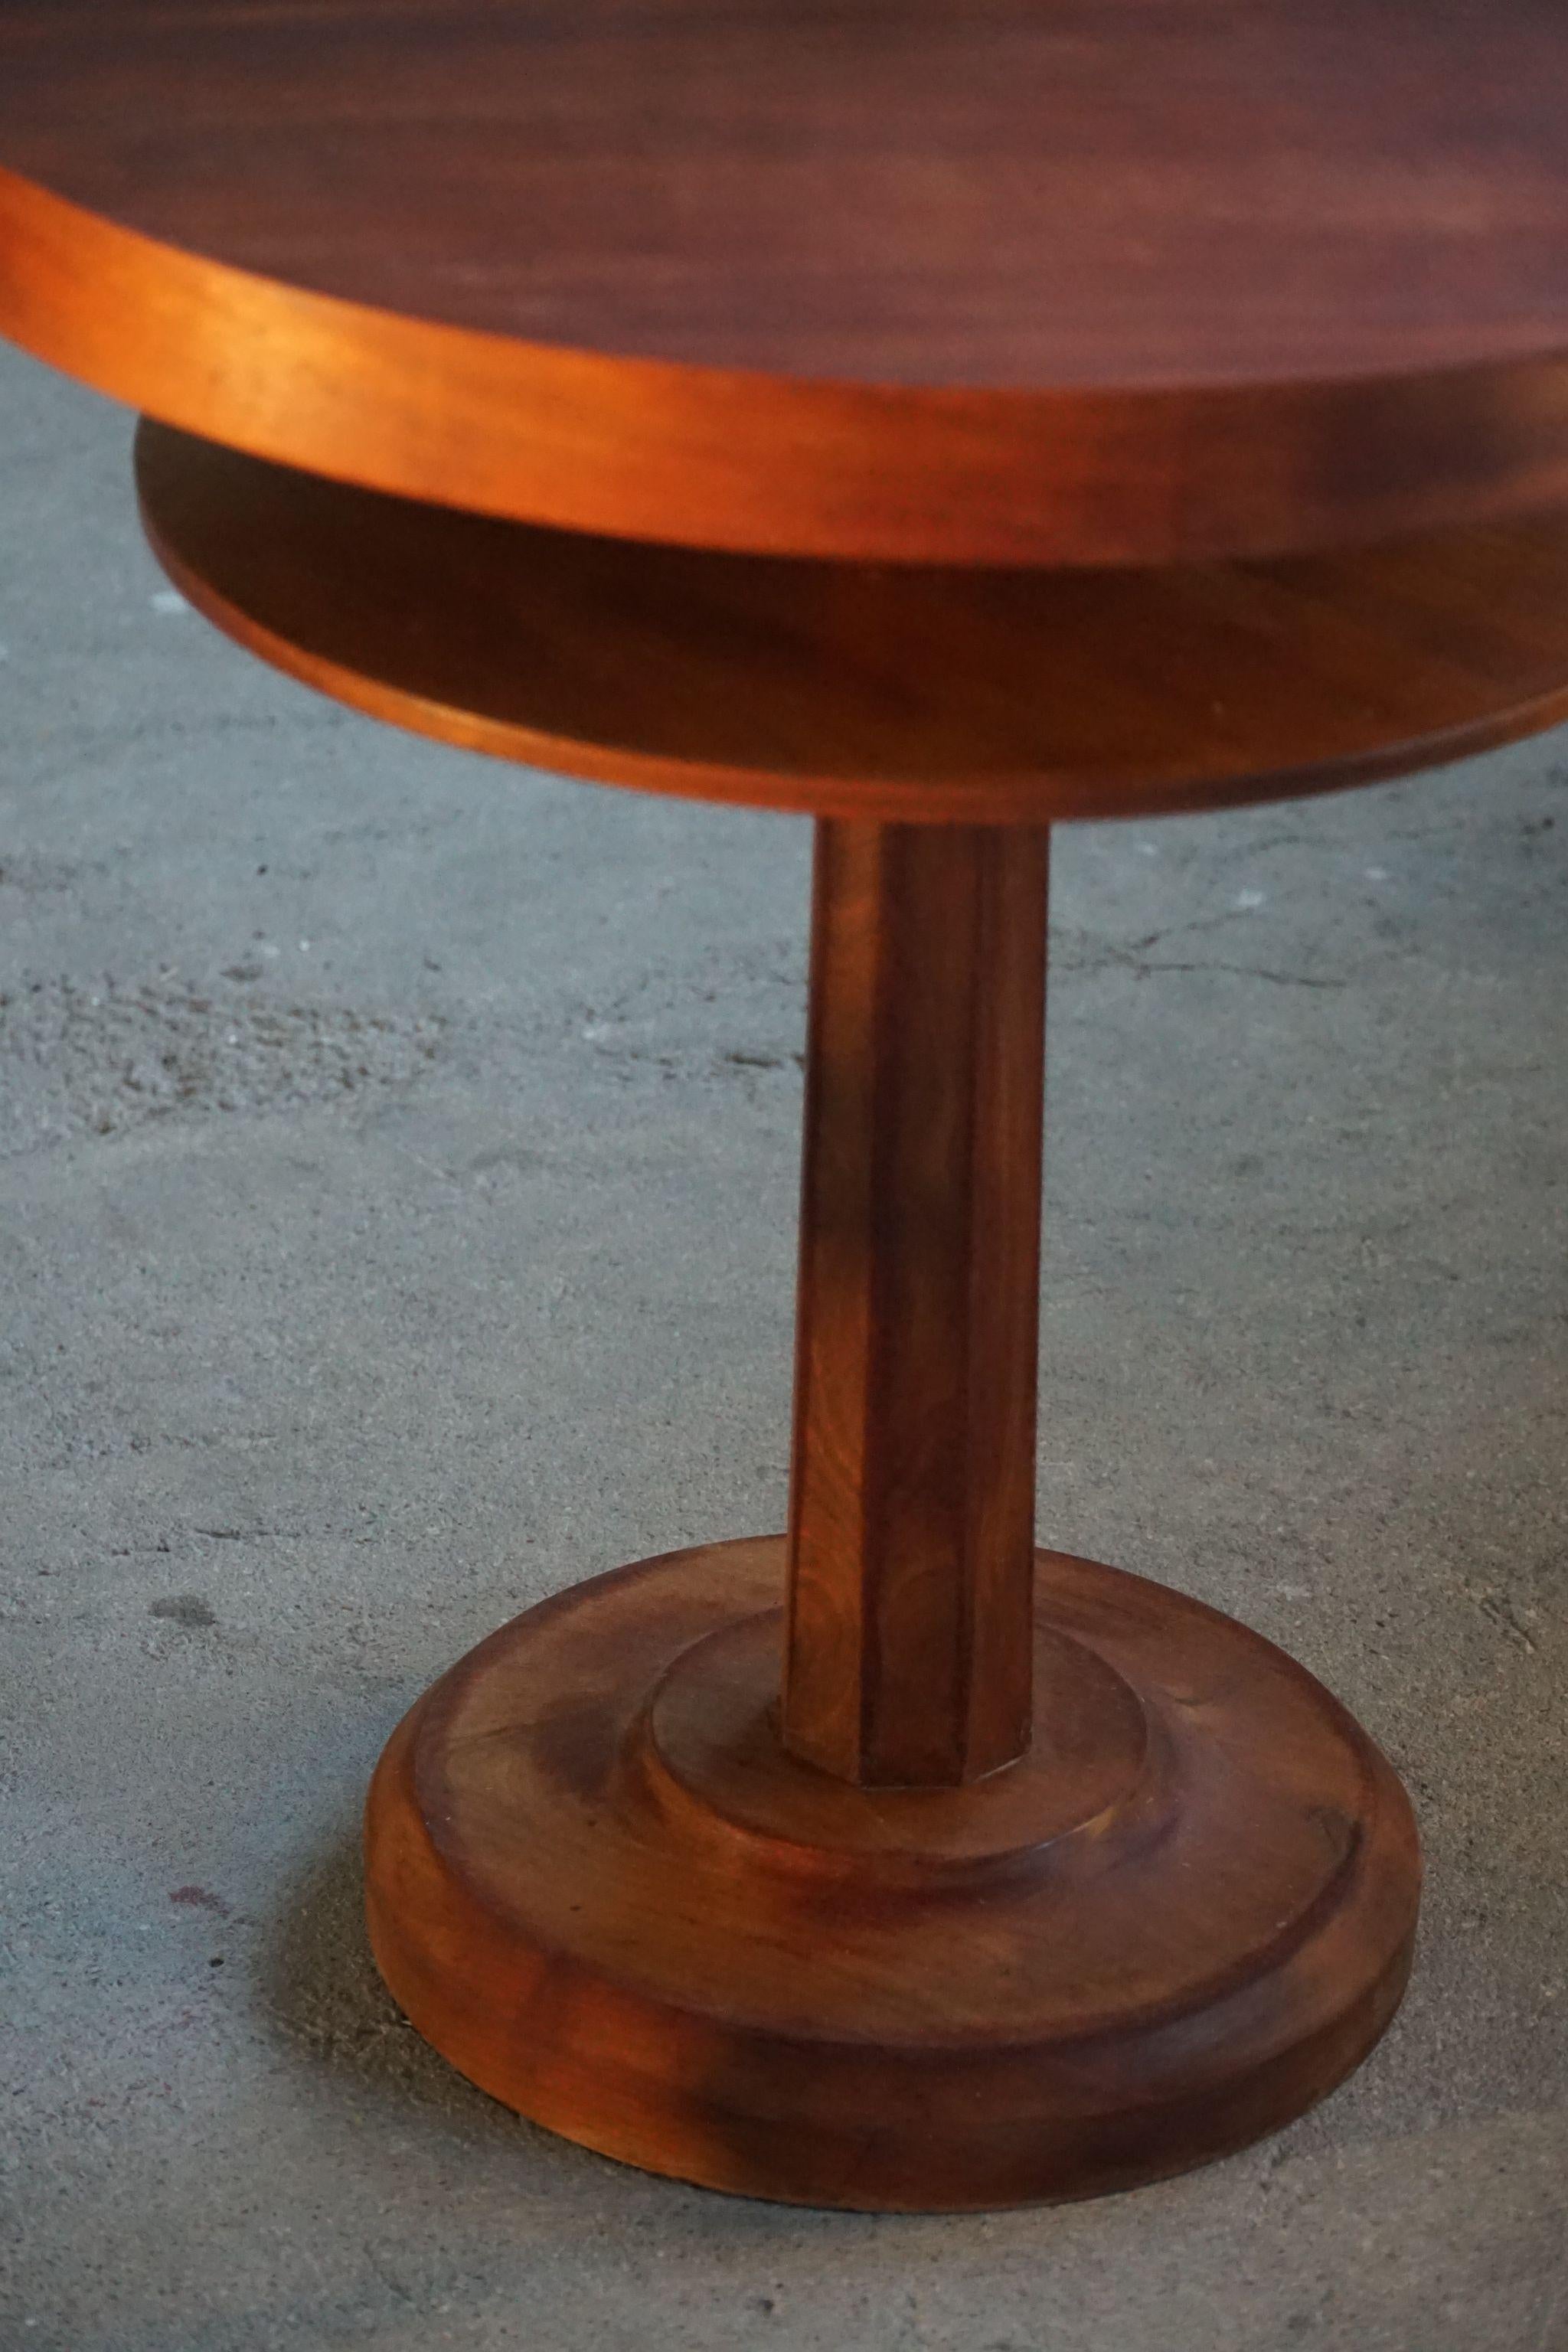 20th Century Danish Round Art Deco Side Table / Coffee Table in Teak, Made in 1940s